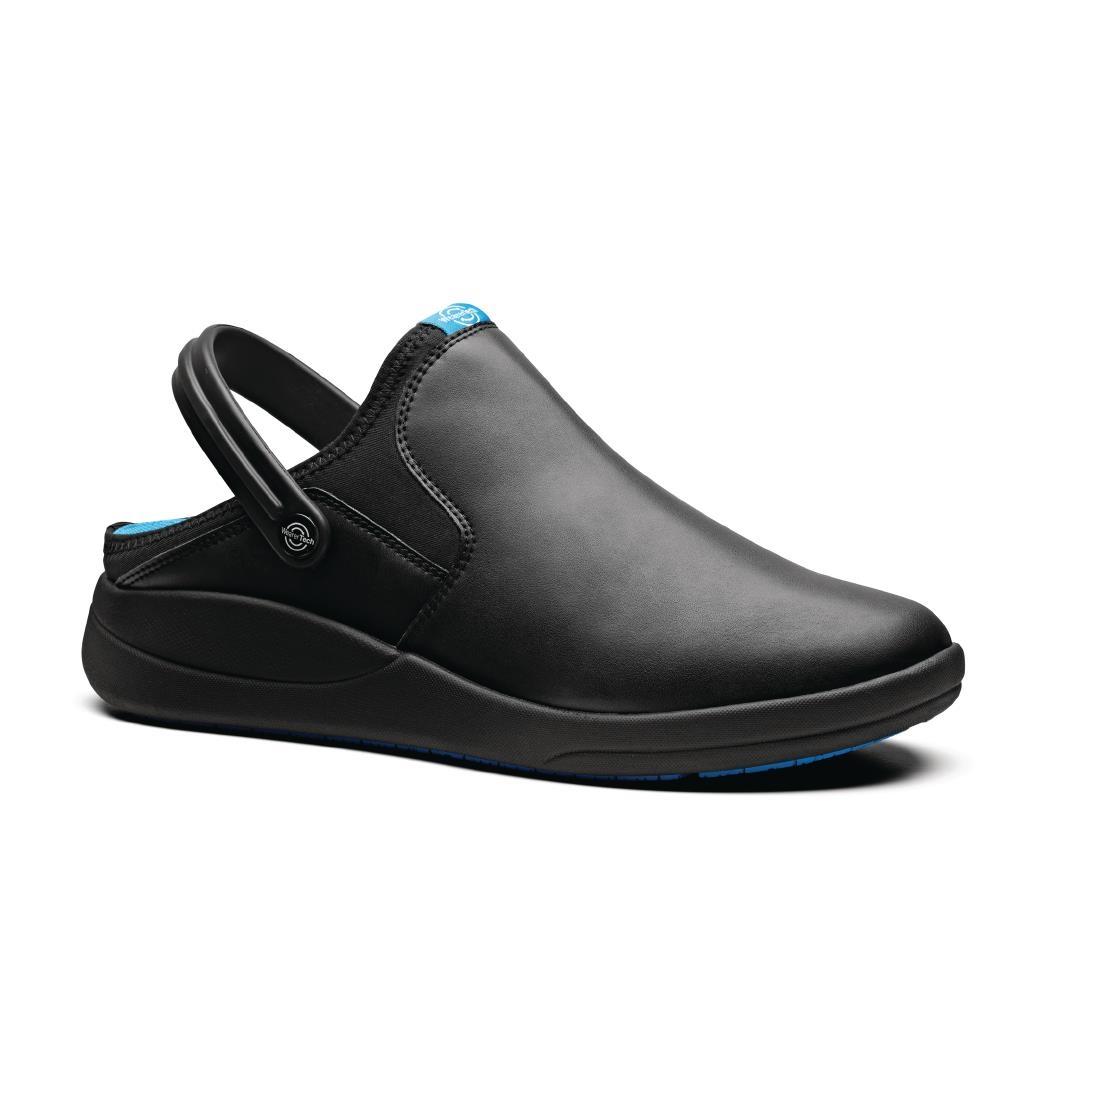 WearerTech Refresh Clog Black with Firm Insoles Size 42 - BB556-8  - 2